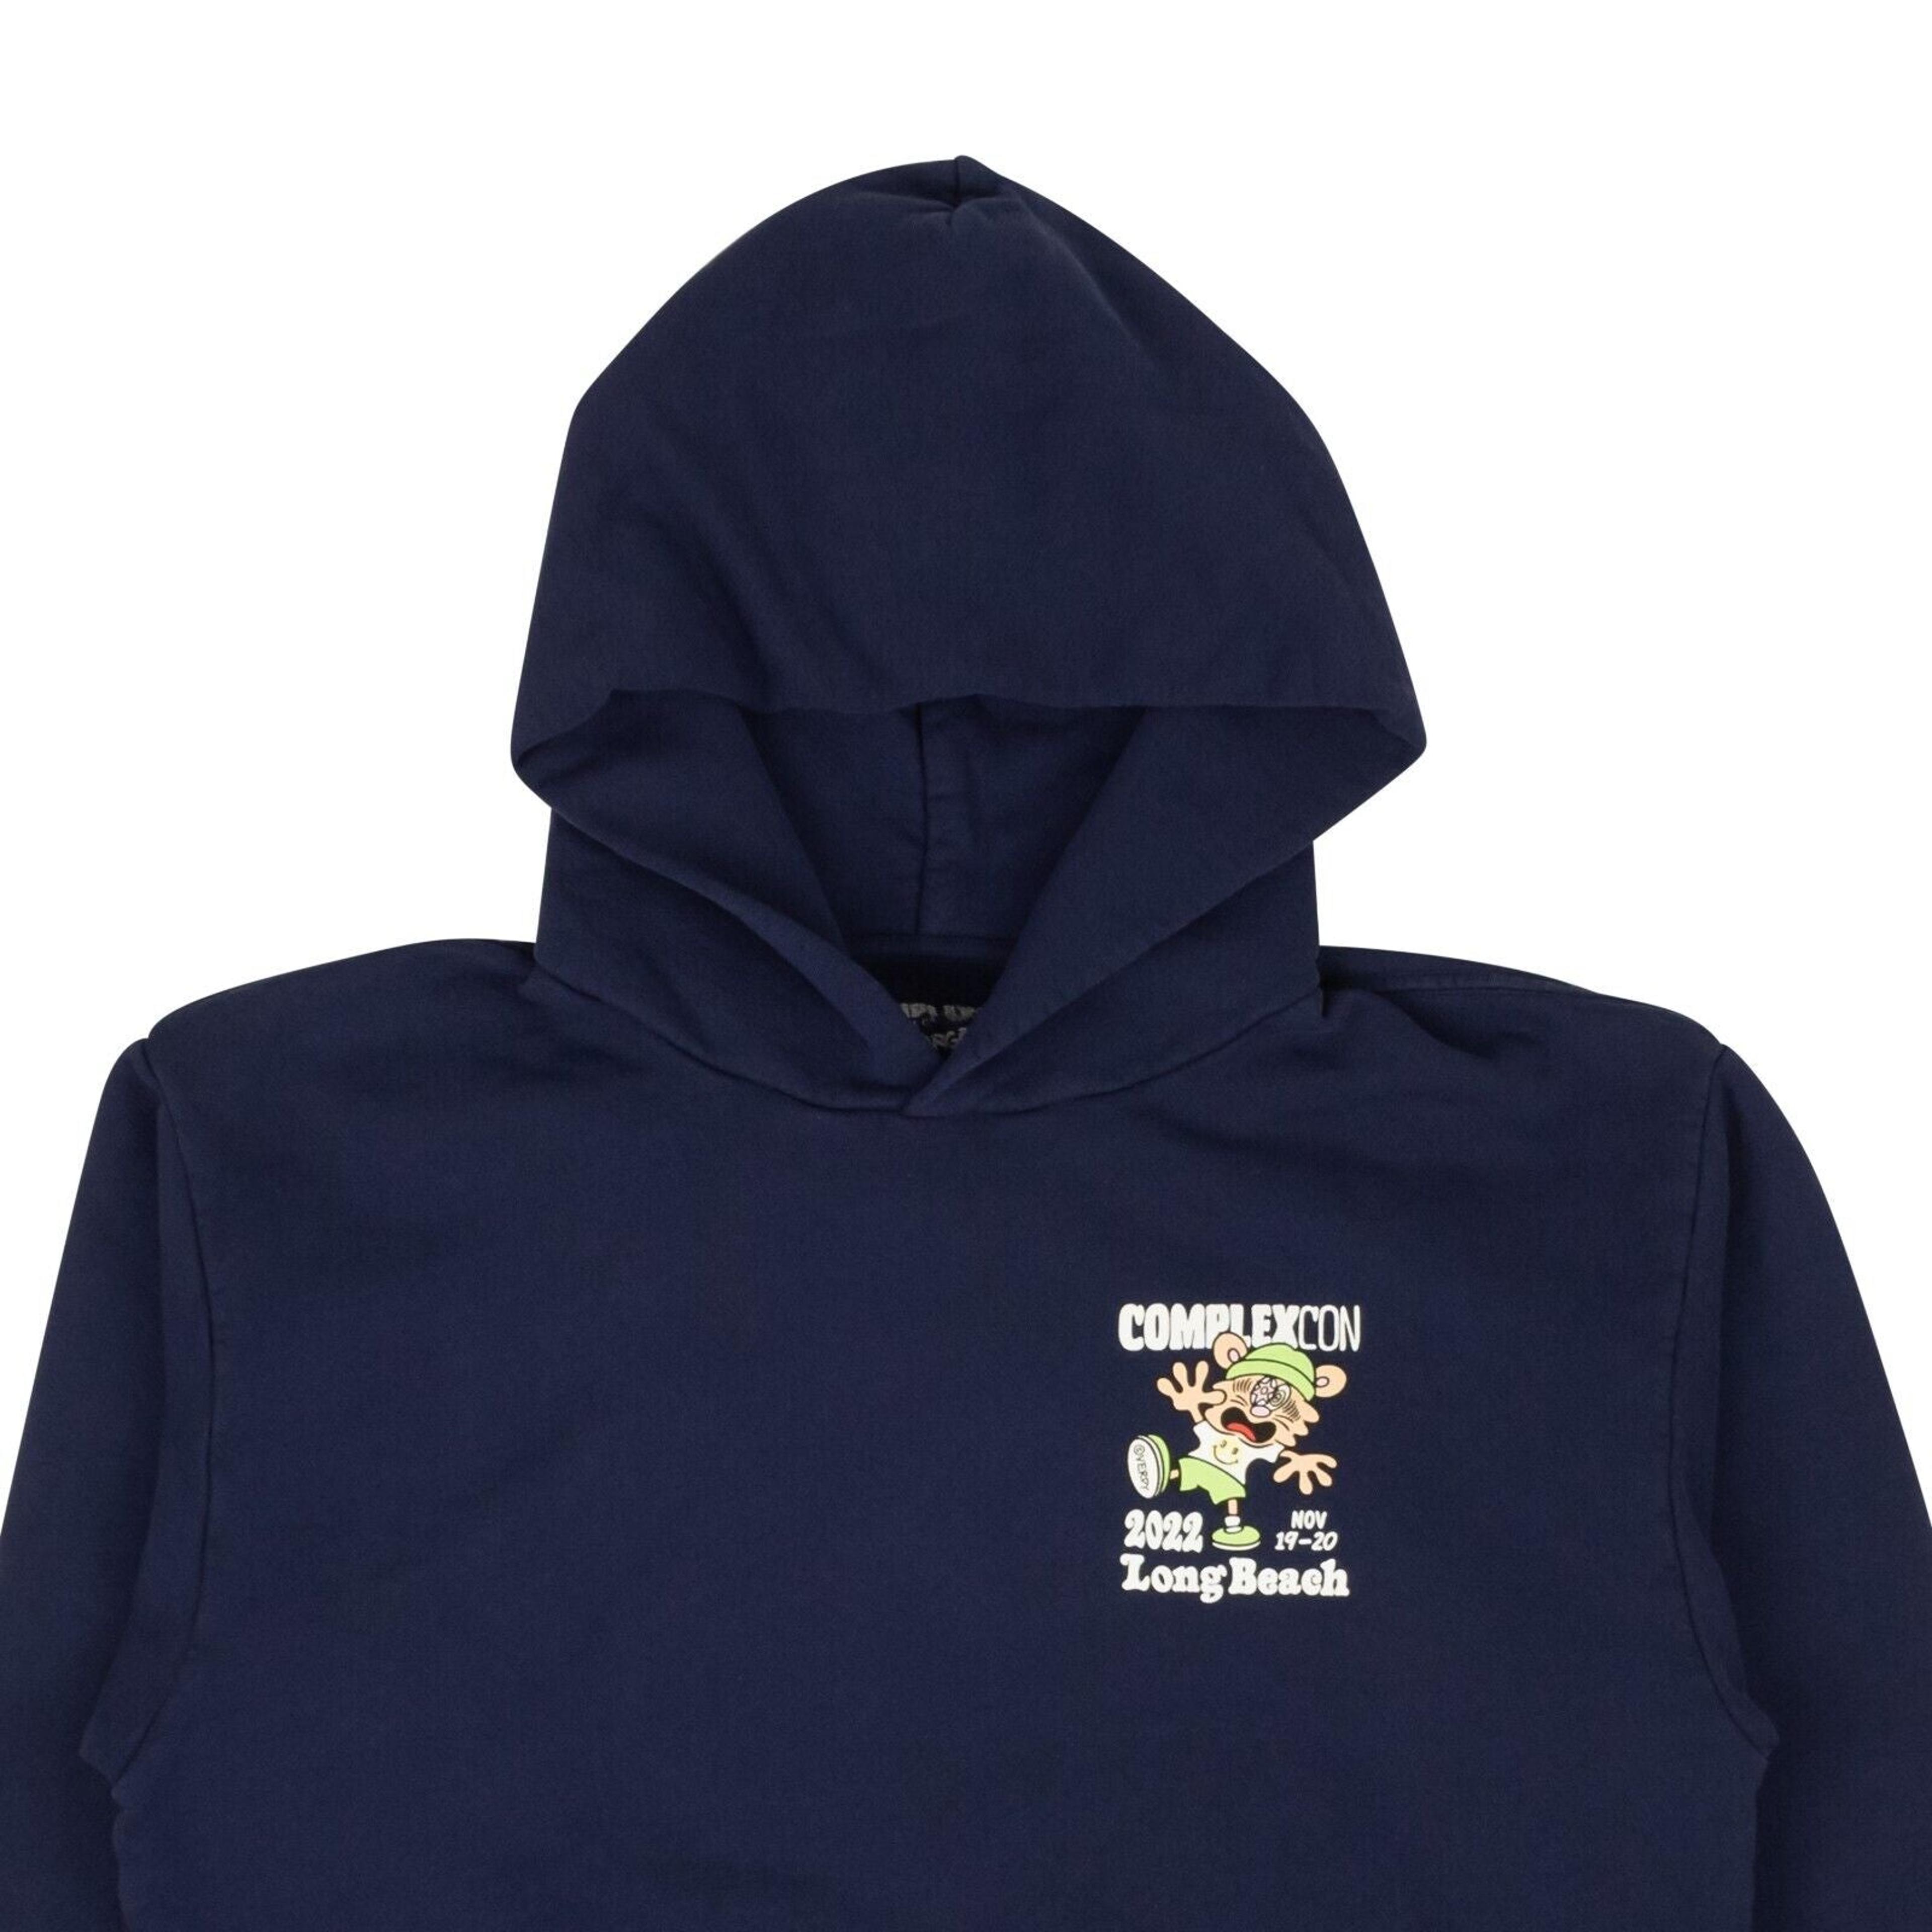 Alternate View 1 of Complexcon X Verdy Hoodie - Navy